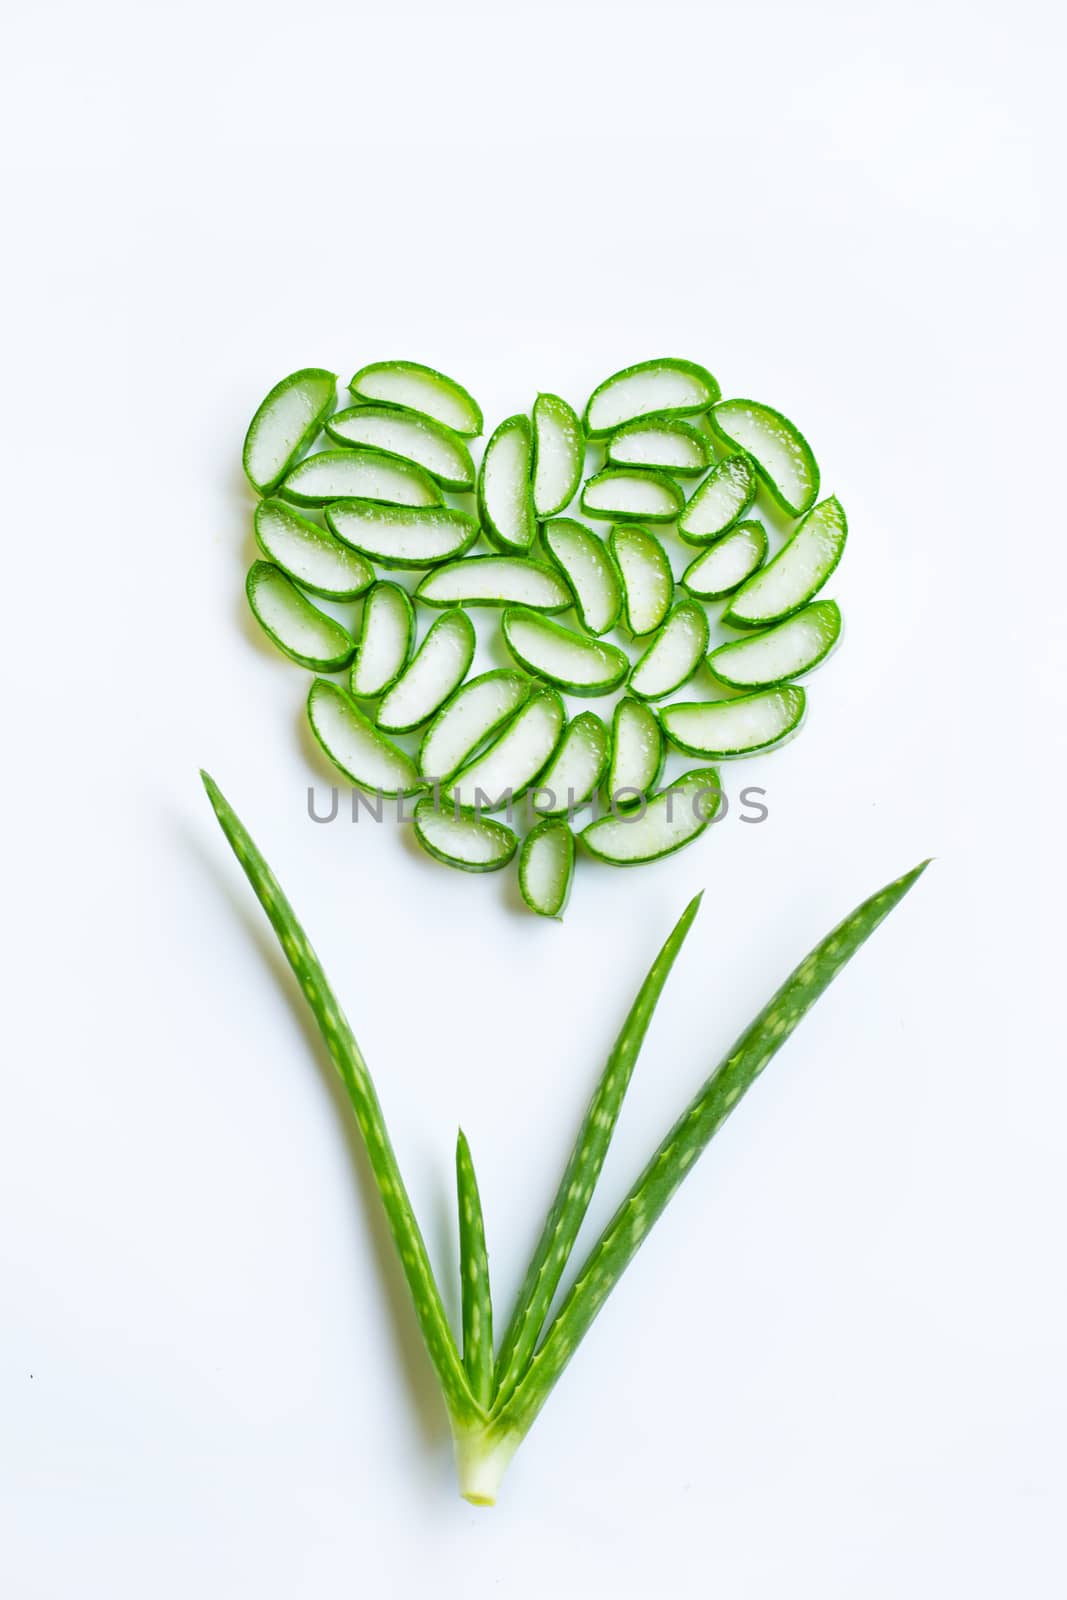 Aloe vera with slices heart shaped on white background